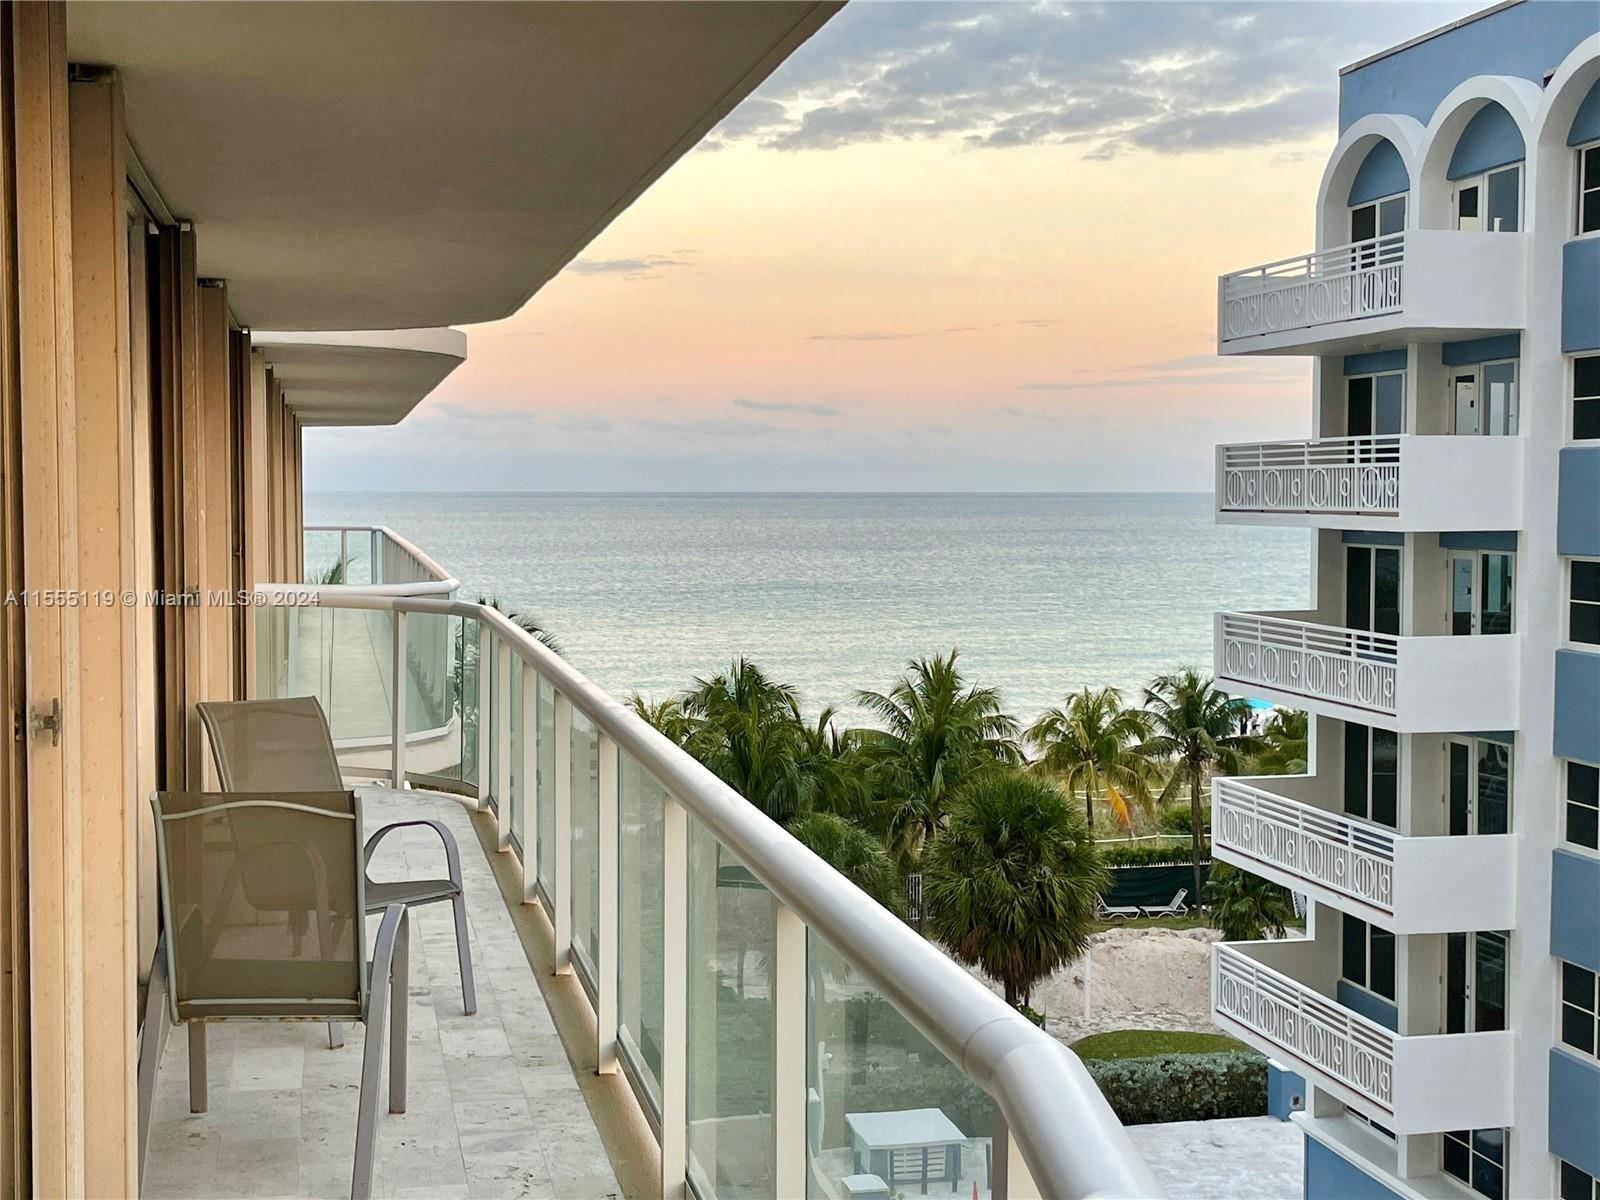 Rarely available spacious 3 bedroom corner unit with wrap around balcony with city and ocean views at luxurious oceanfront 88 Ocean.